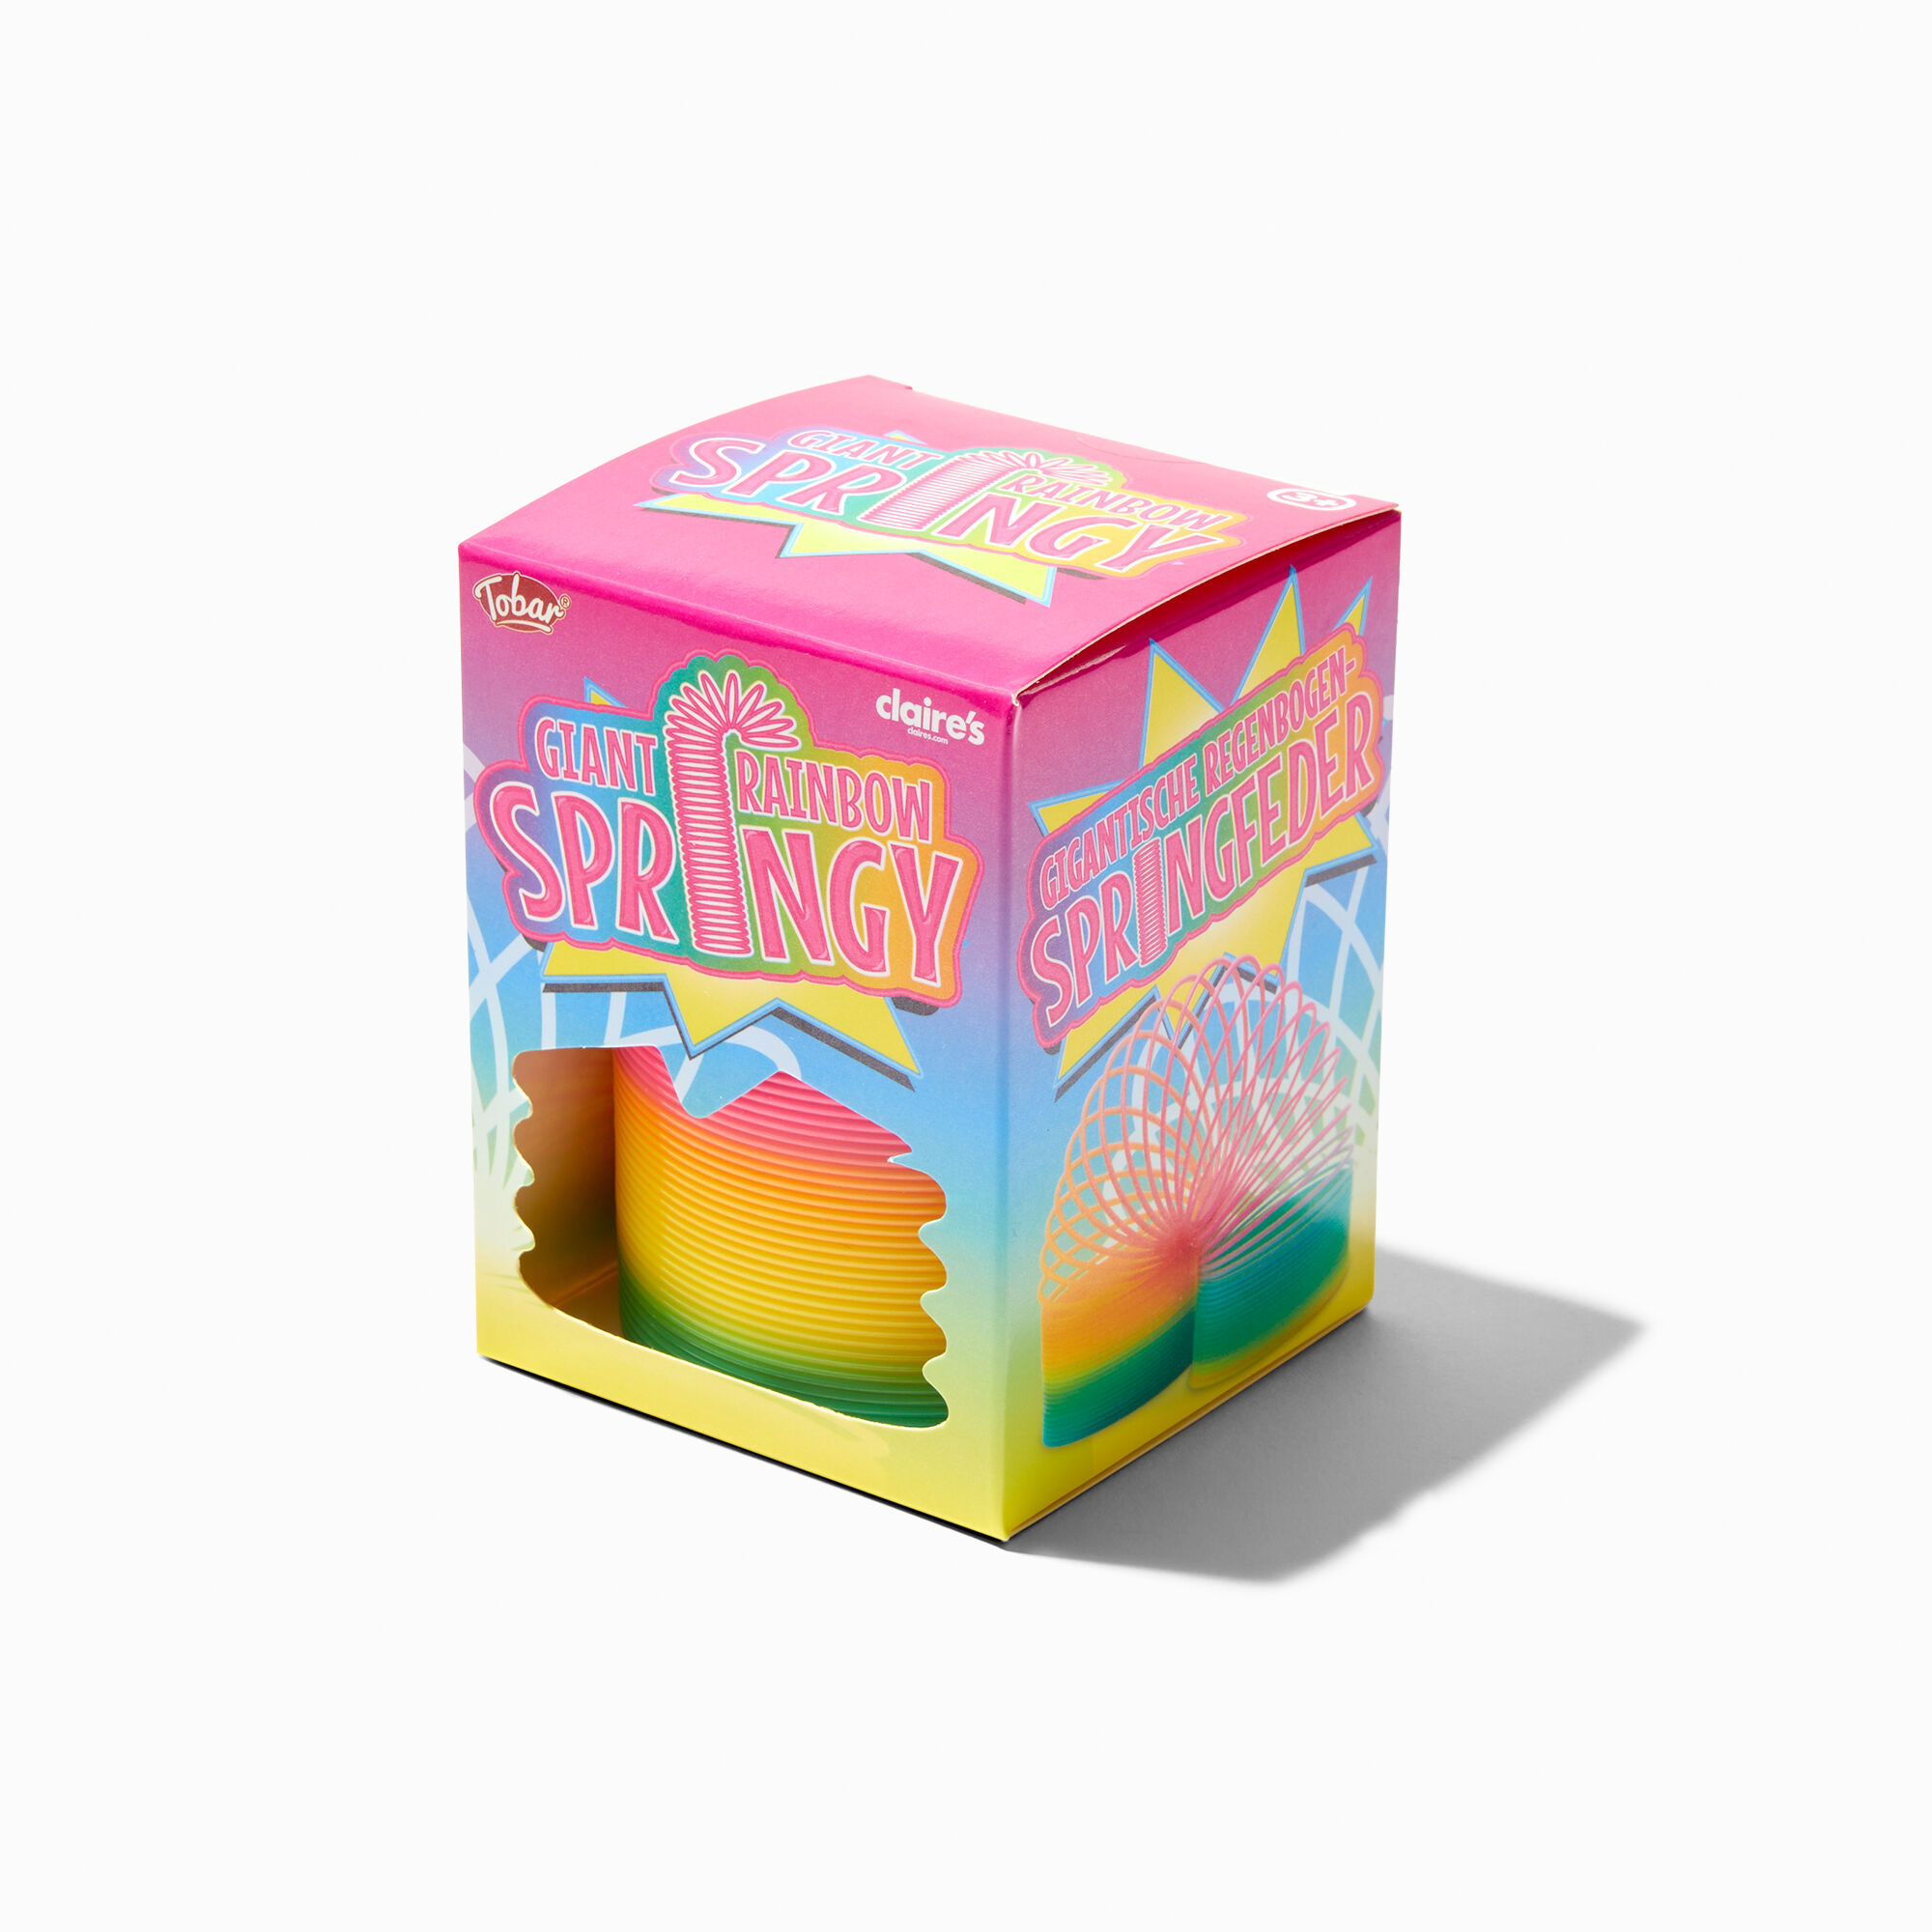 View Giant Springy Slinky Claires Exclusive Fidget Toy Rainbow information